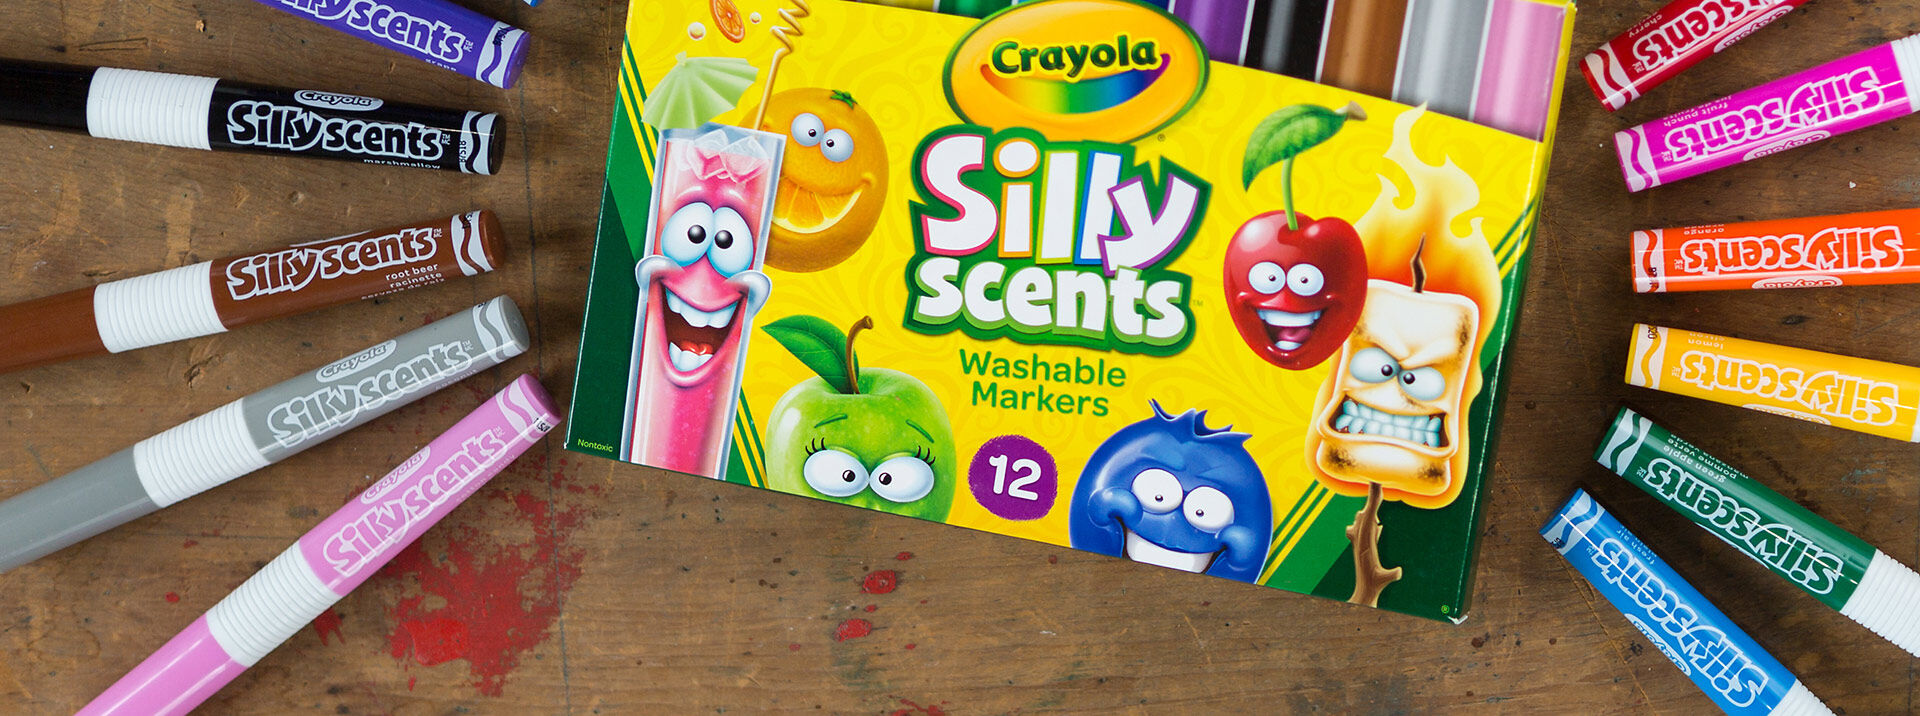 Crayola Silly Scents Coloring Book & Scented Markers, Fair